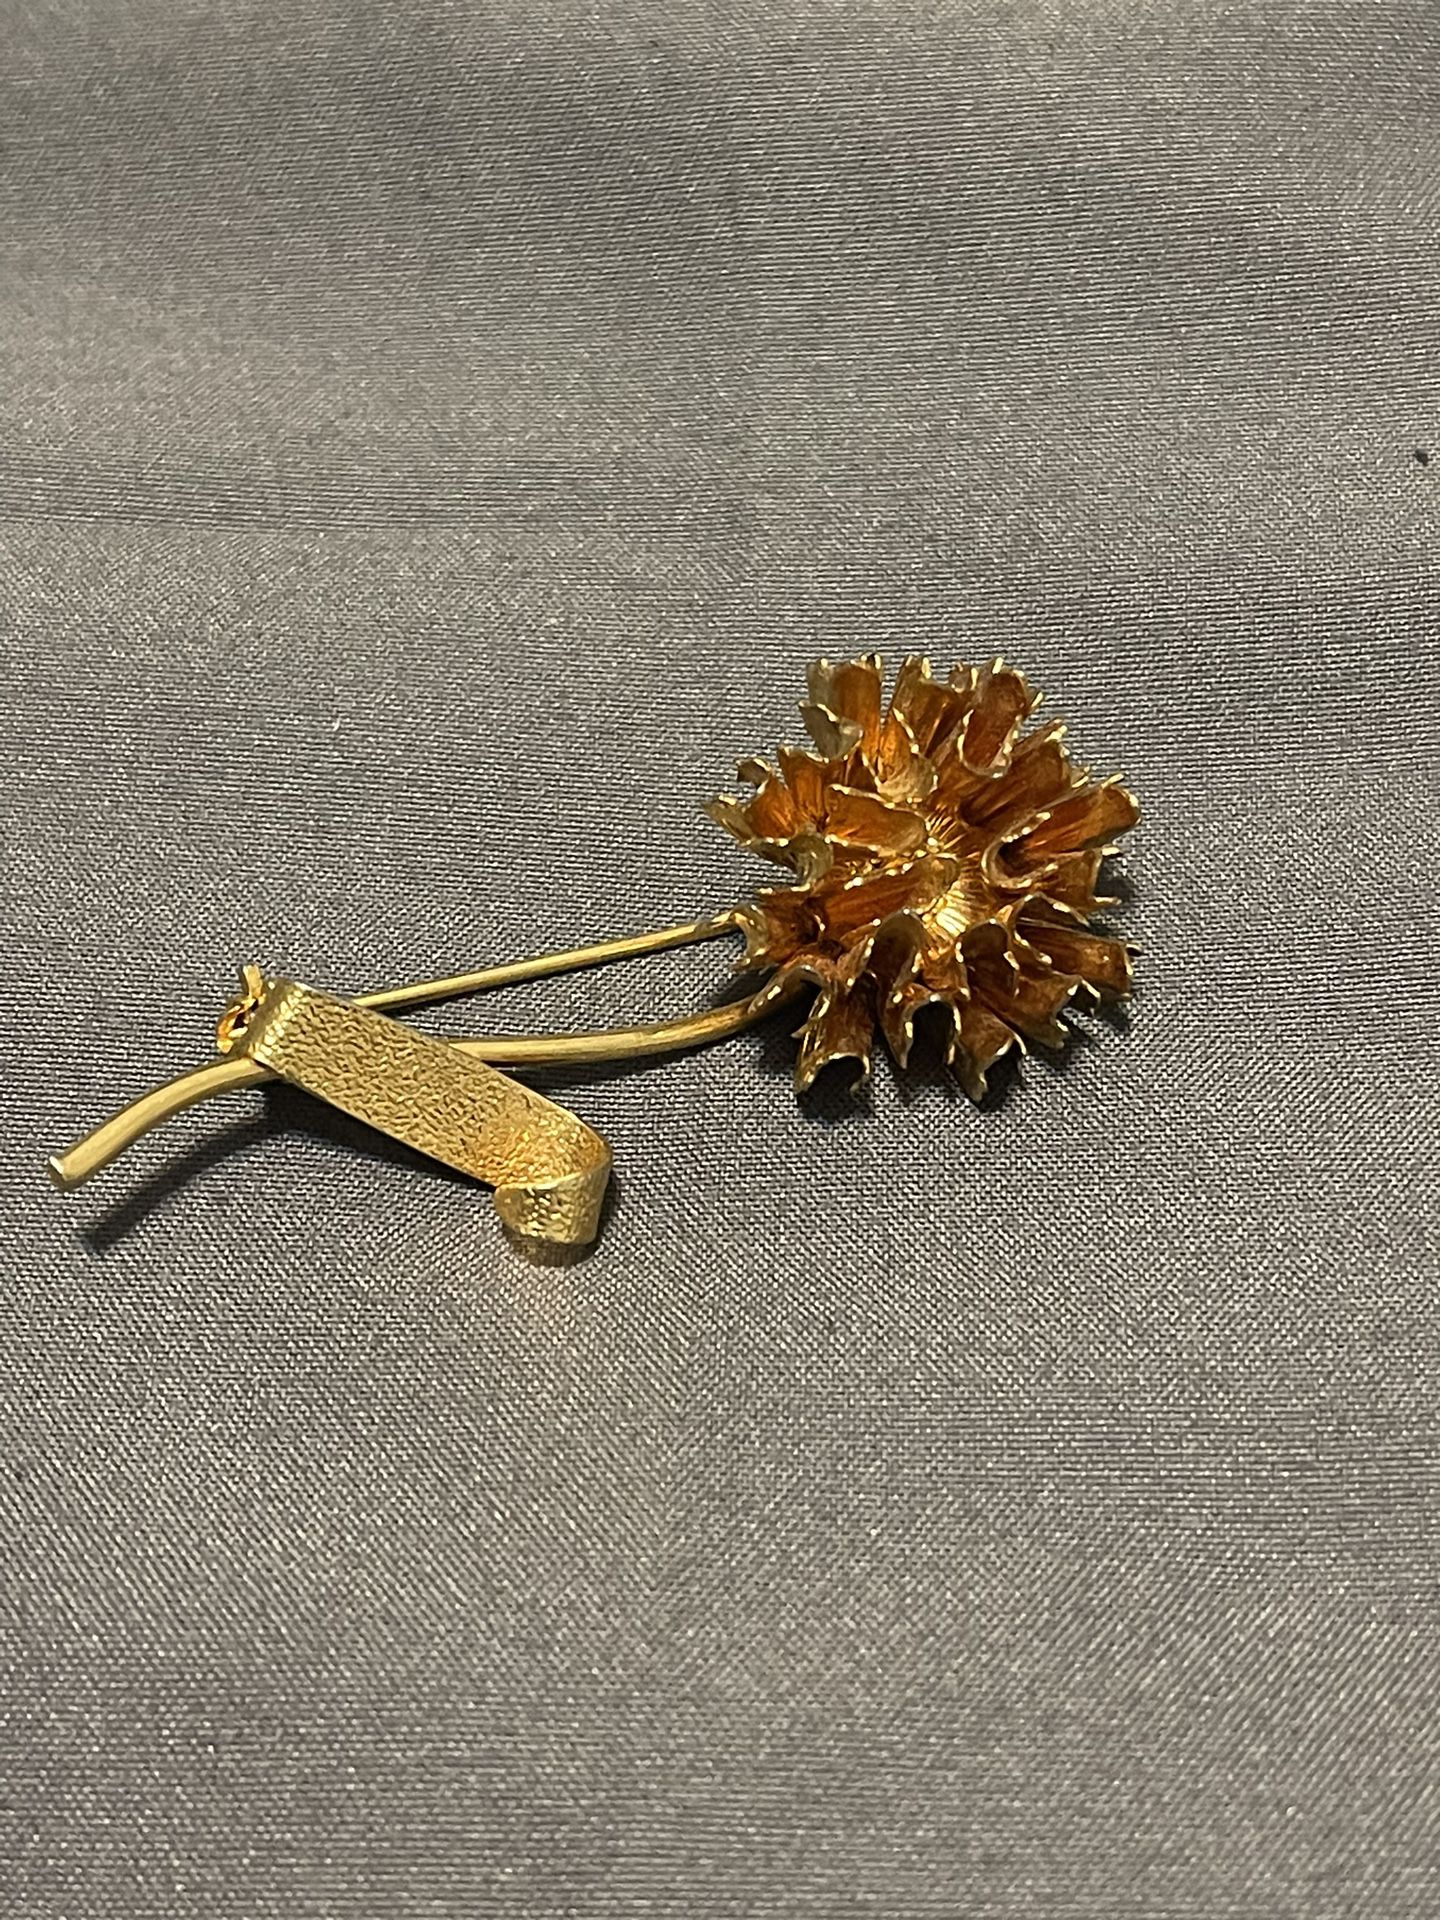 Gold Tone Flower Brooch Very Elegant And Delicate- 